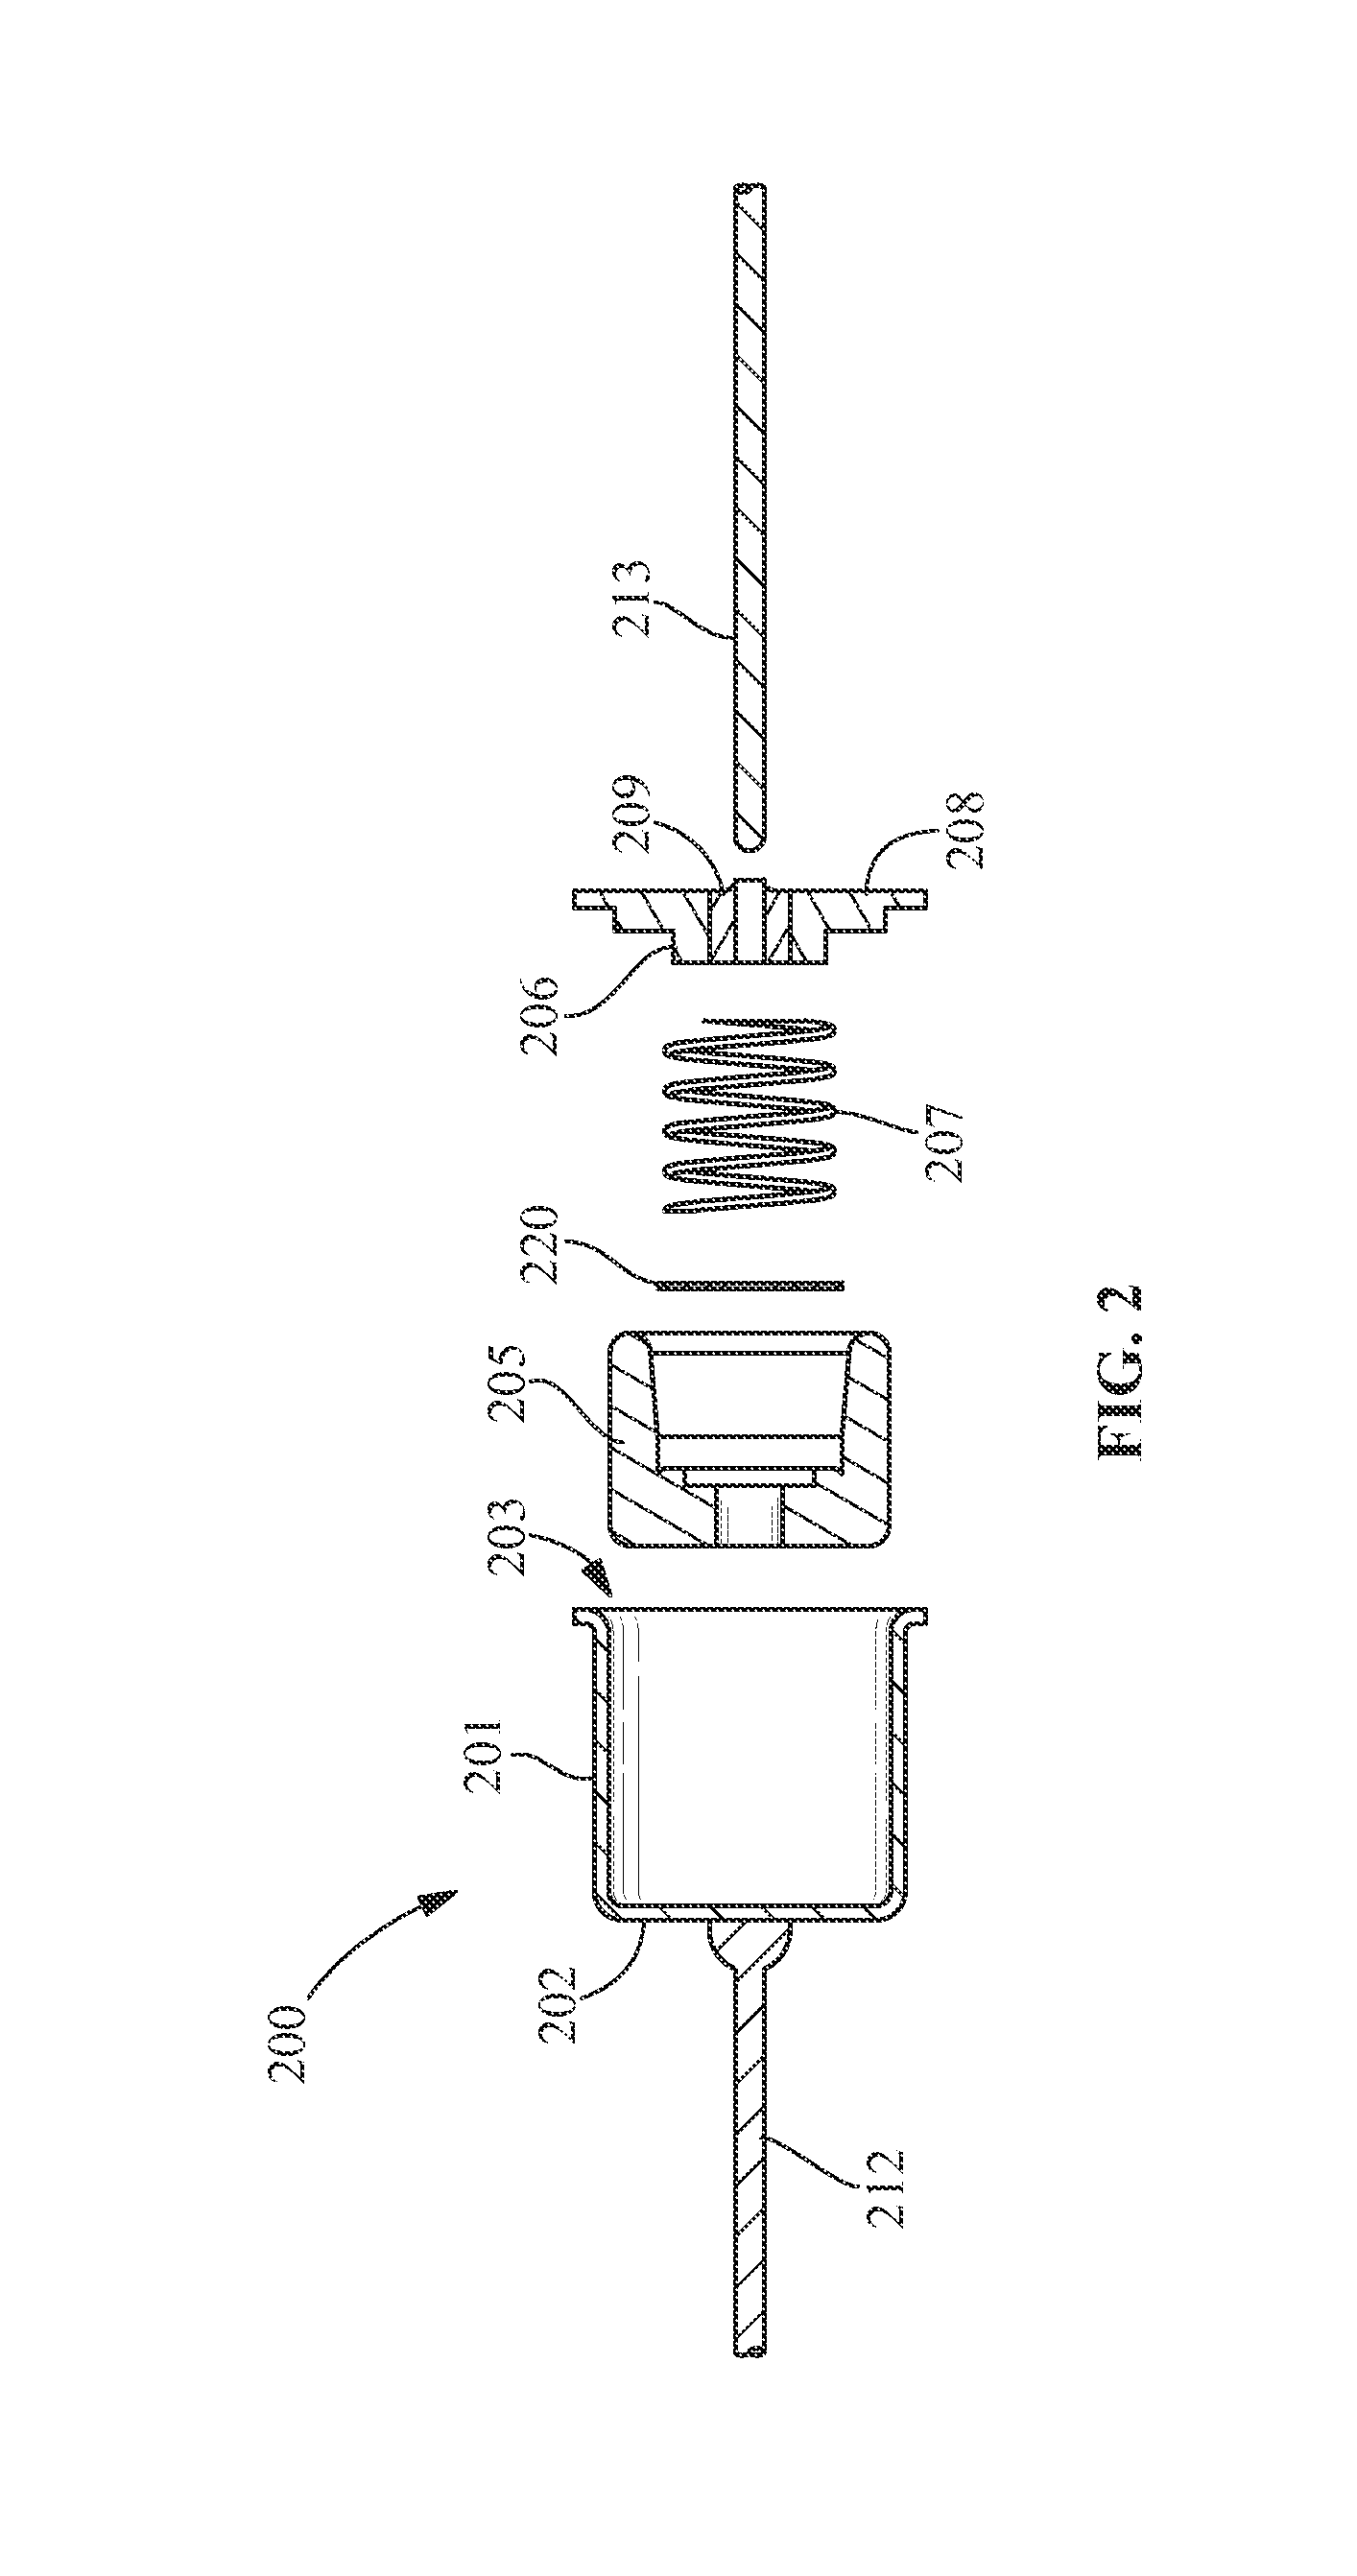 Spring contact, inertia switch, and method of manufacturing an inertia switch